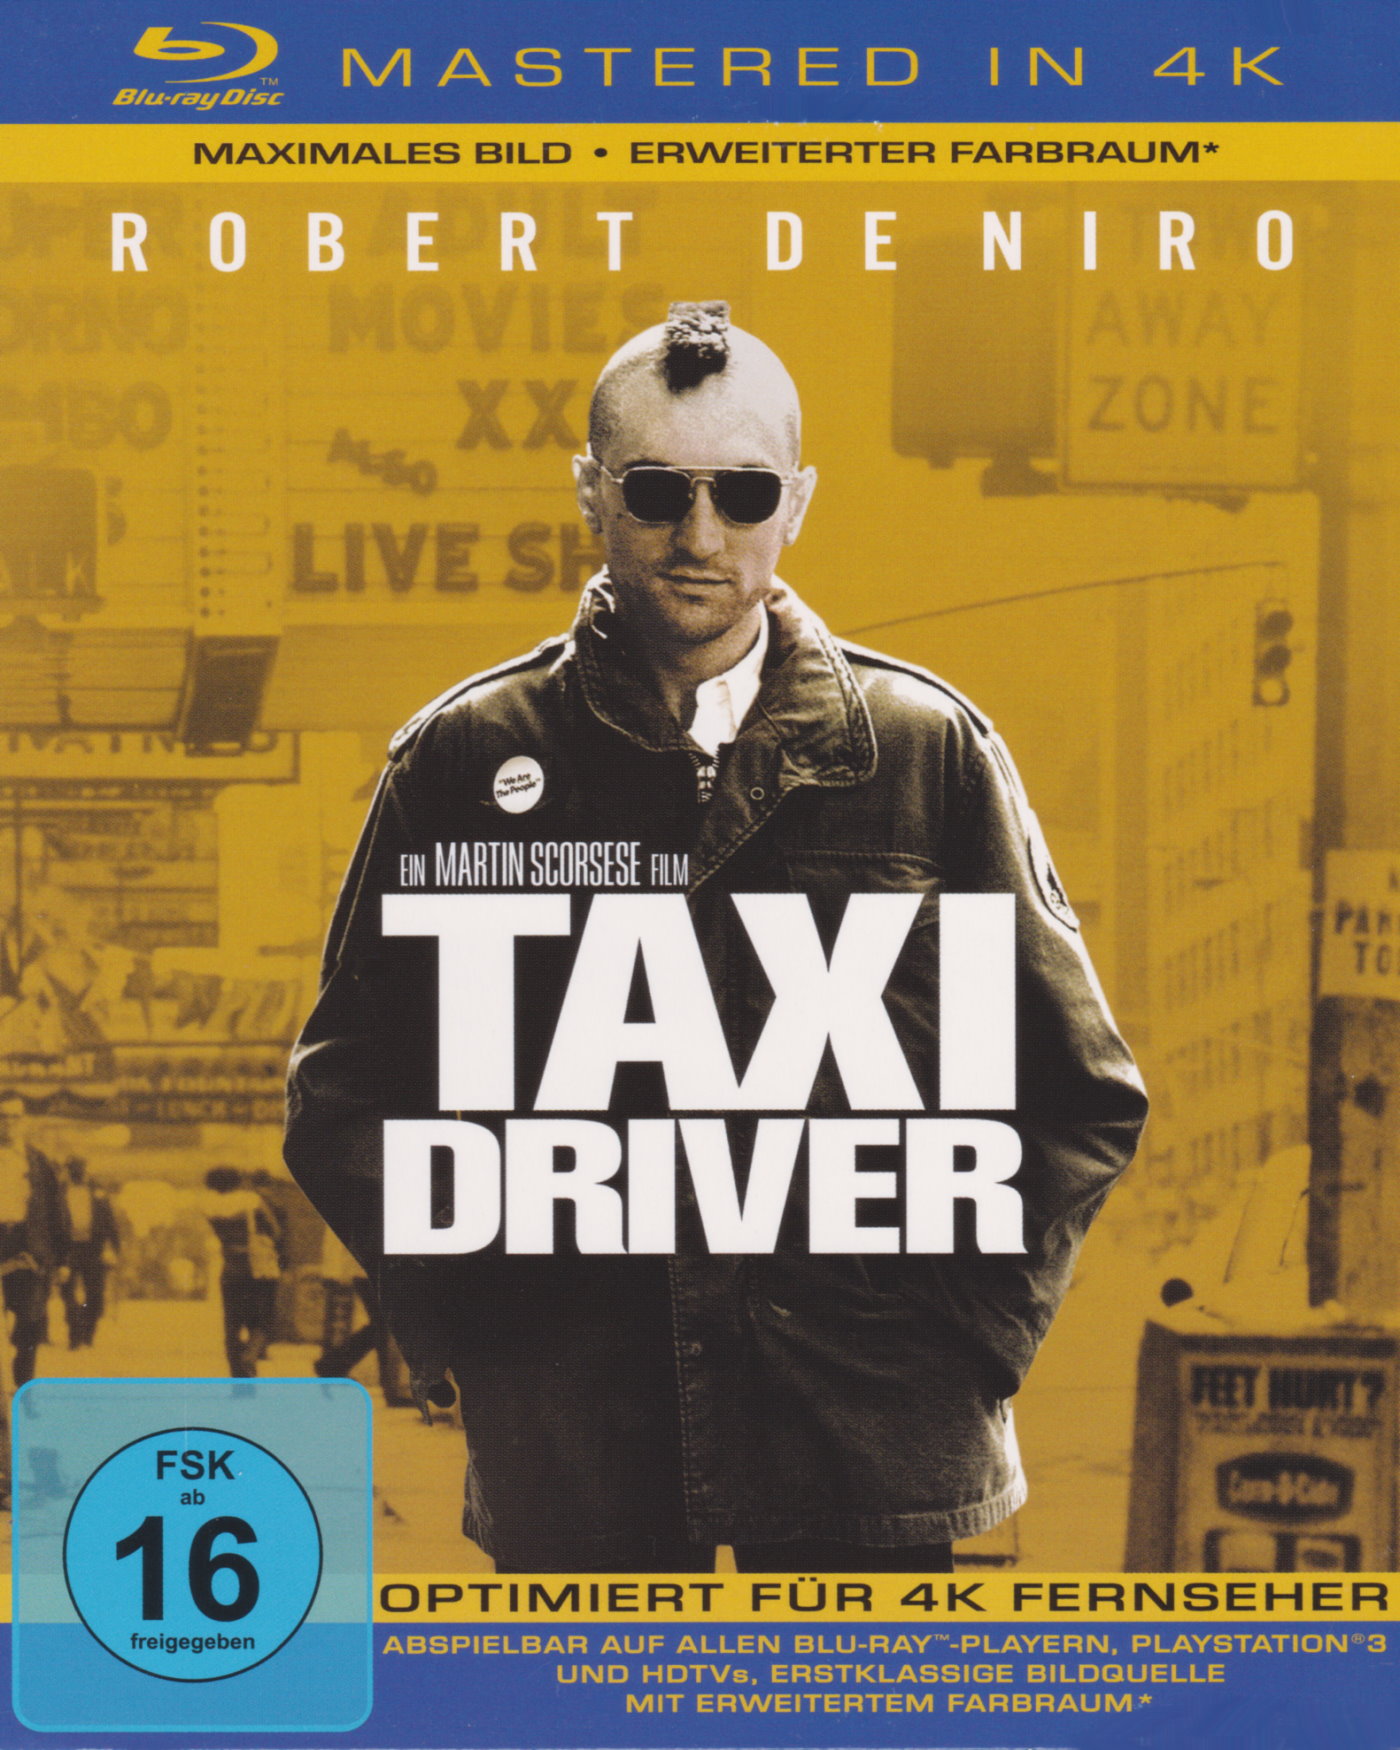 Cover - Taxi Driver.jpg